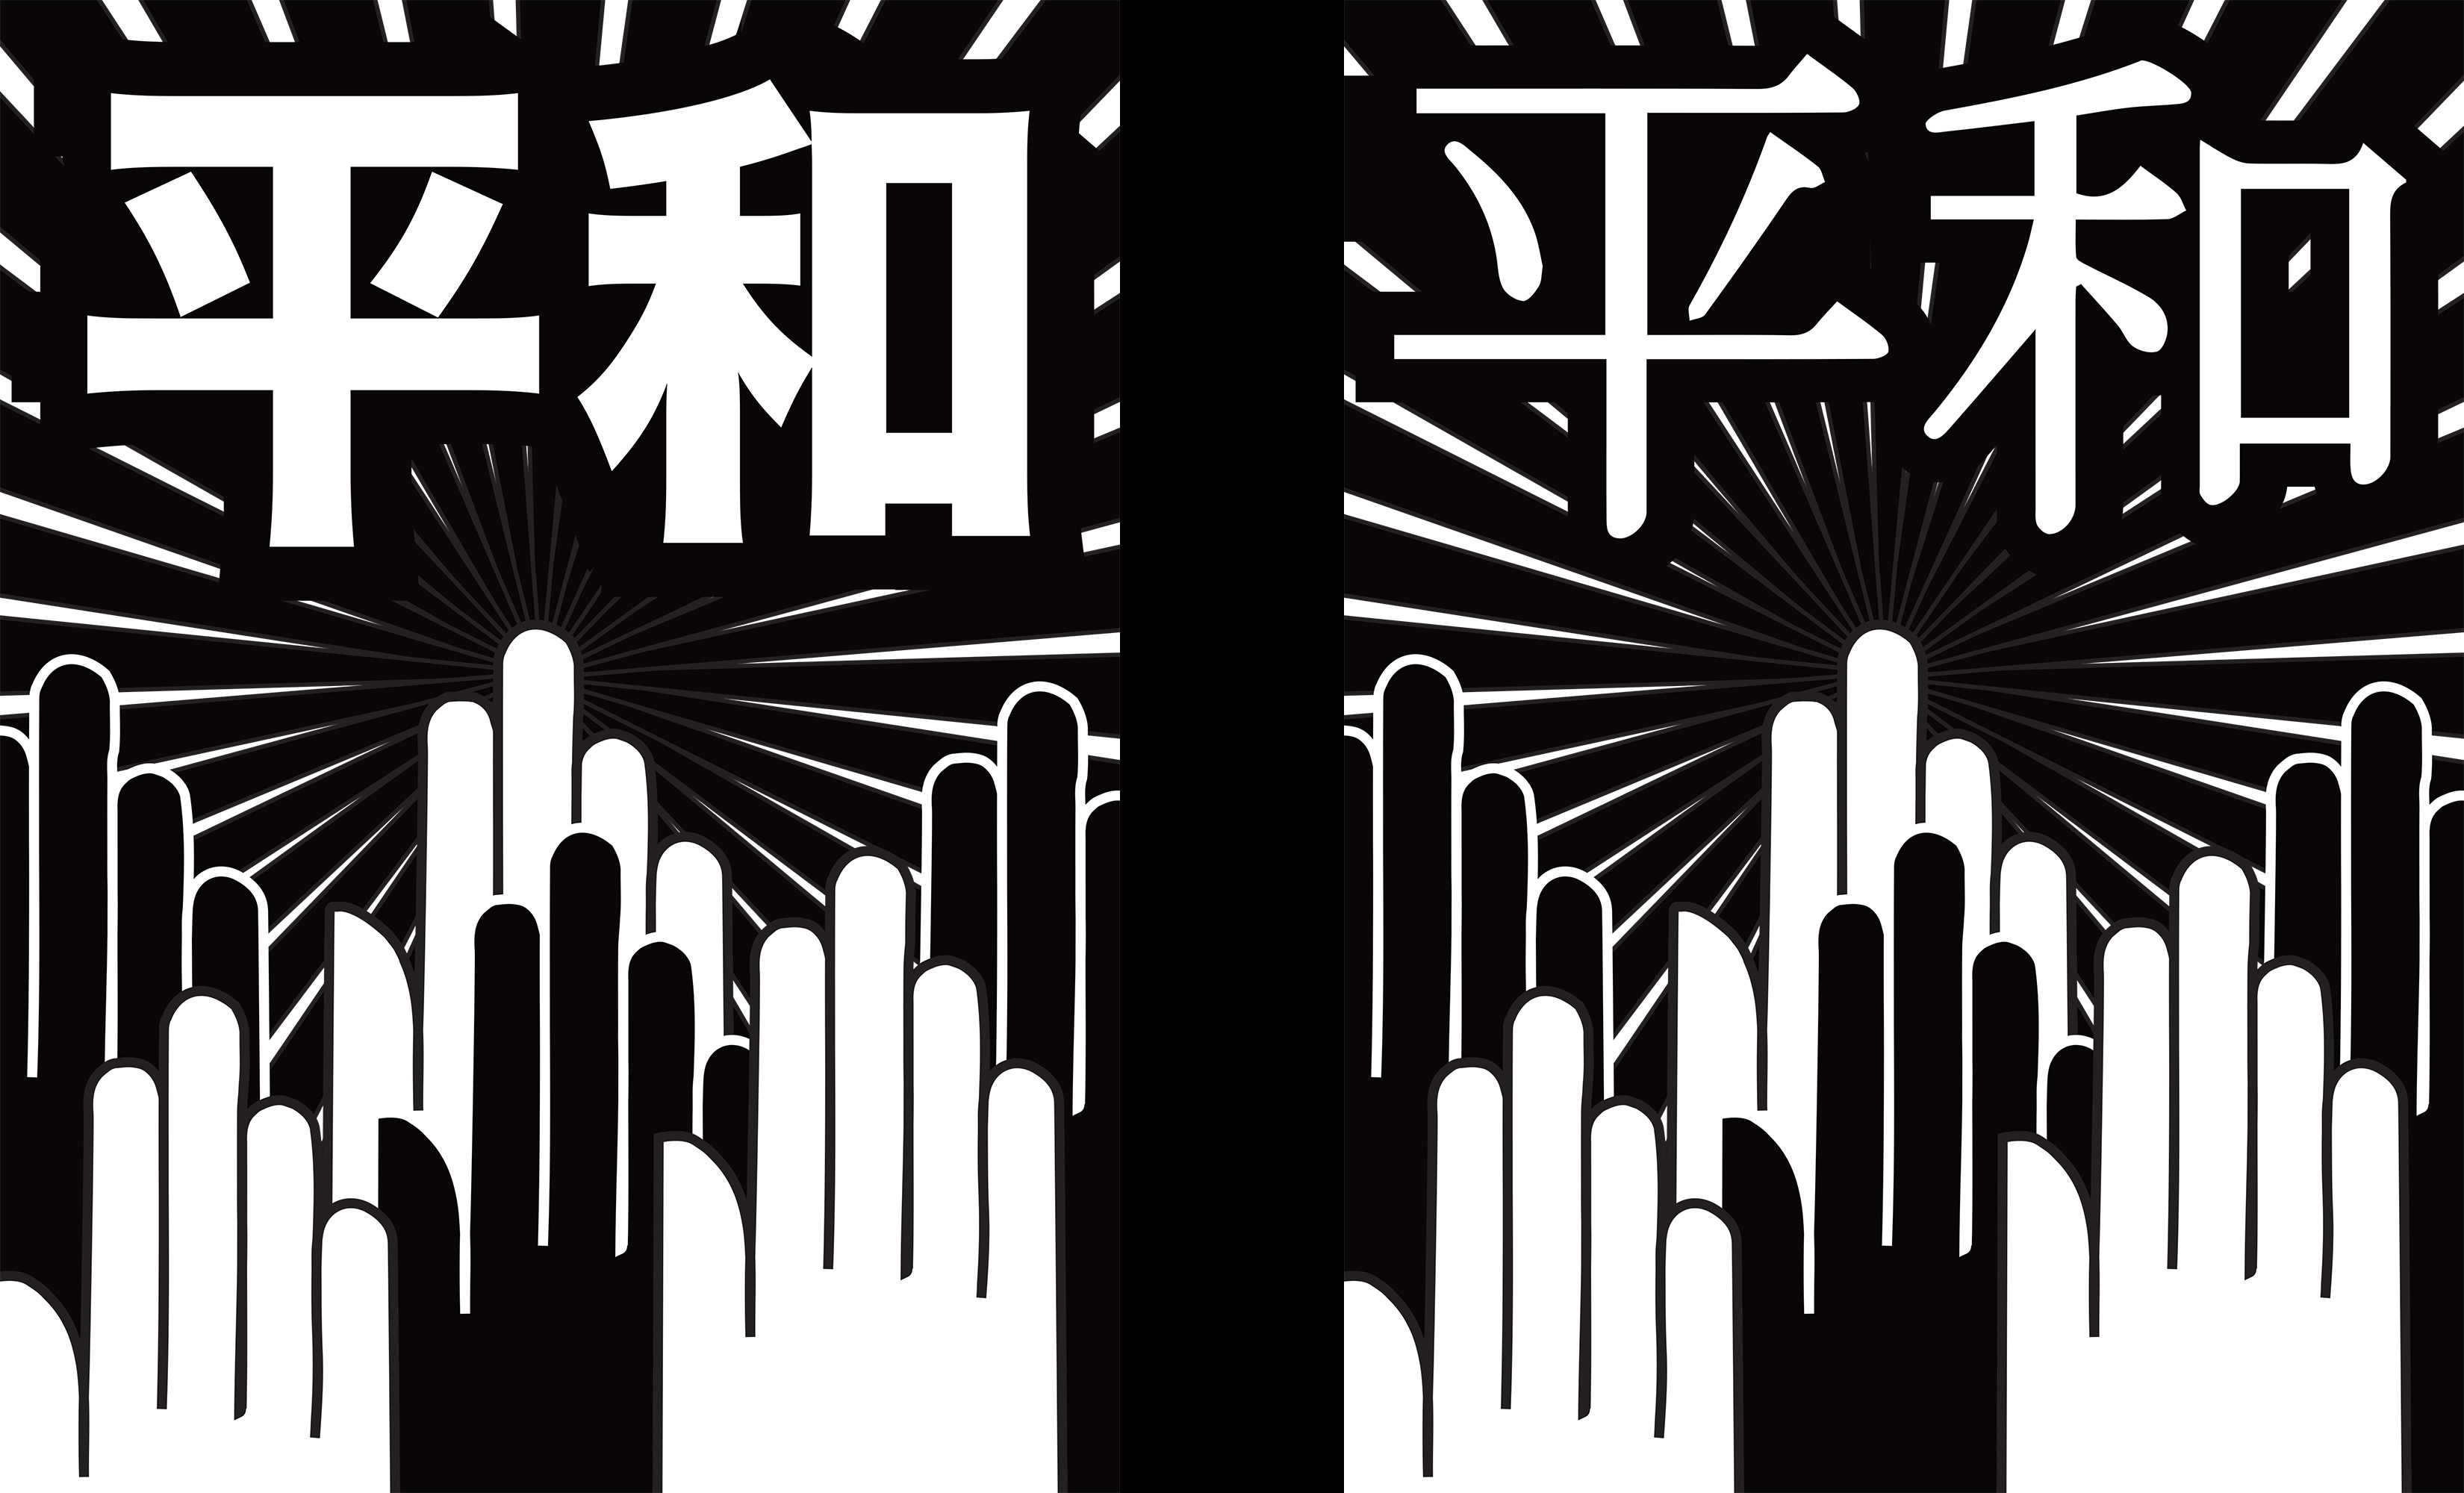 These are bold graphic works in black and white. At the bottom of the composition, hands–some black and some white–reach upward toward Japanese characters which spell the word PEACE. The characters are framed by white rays like sun beams.